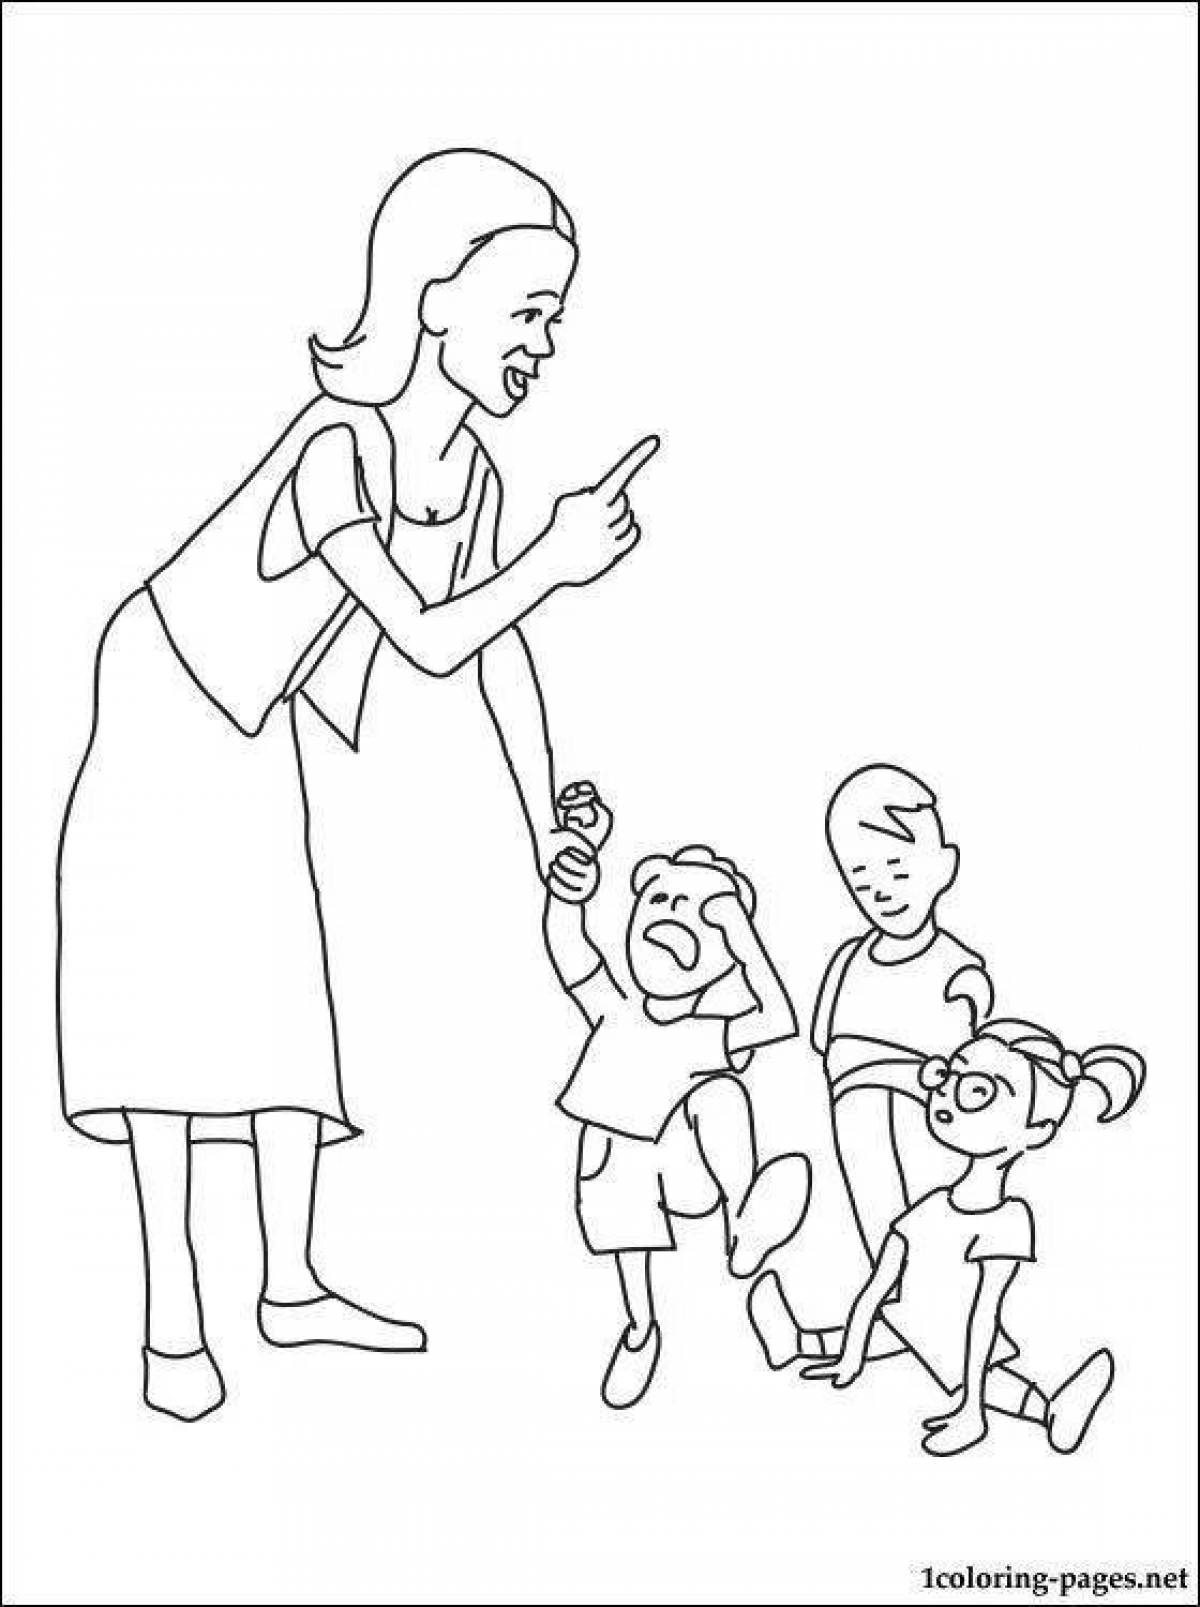 Colour-loving teacher and children coloring pages